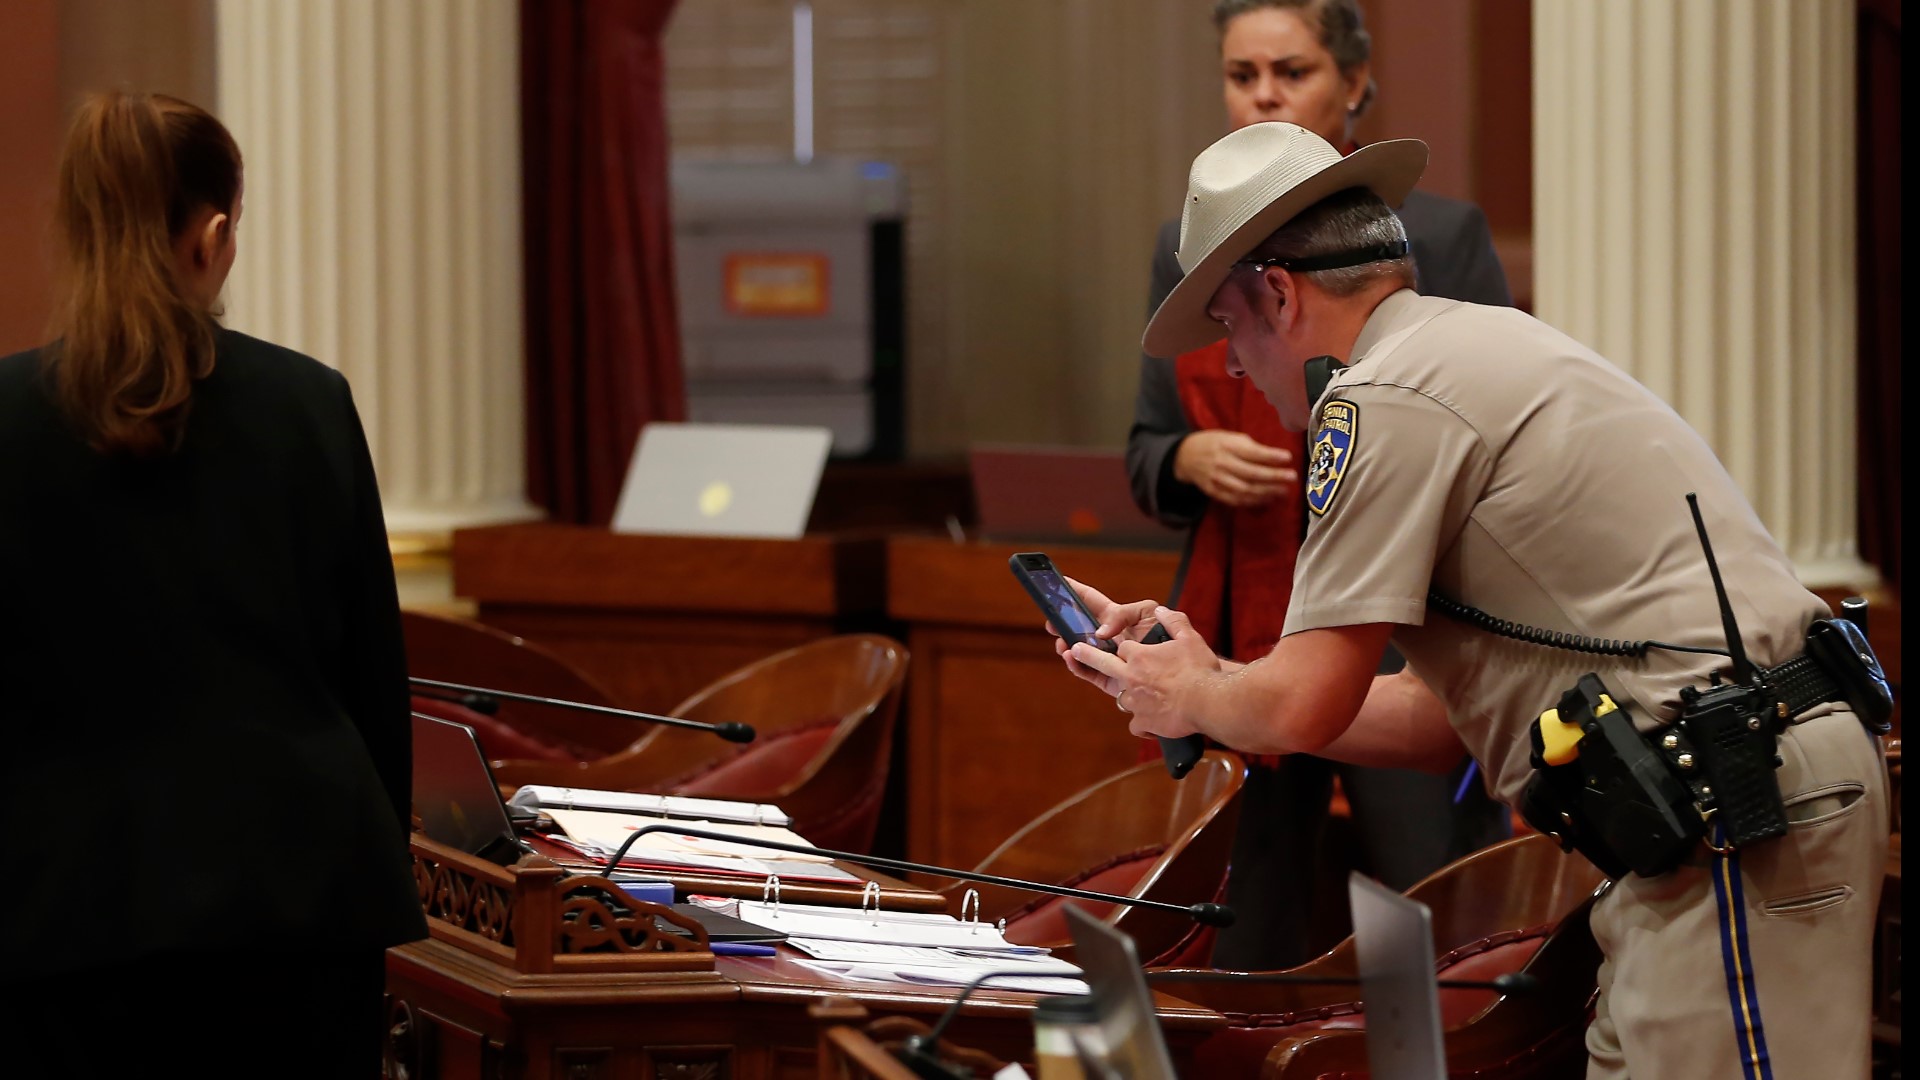 One woman has been arrested after the California Highway Patrol said she threw what appeared to be blood onto the Senate floor. The incident caused the Senate floor and gallery to close.